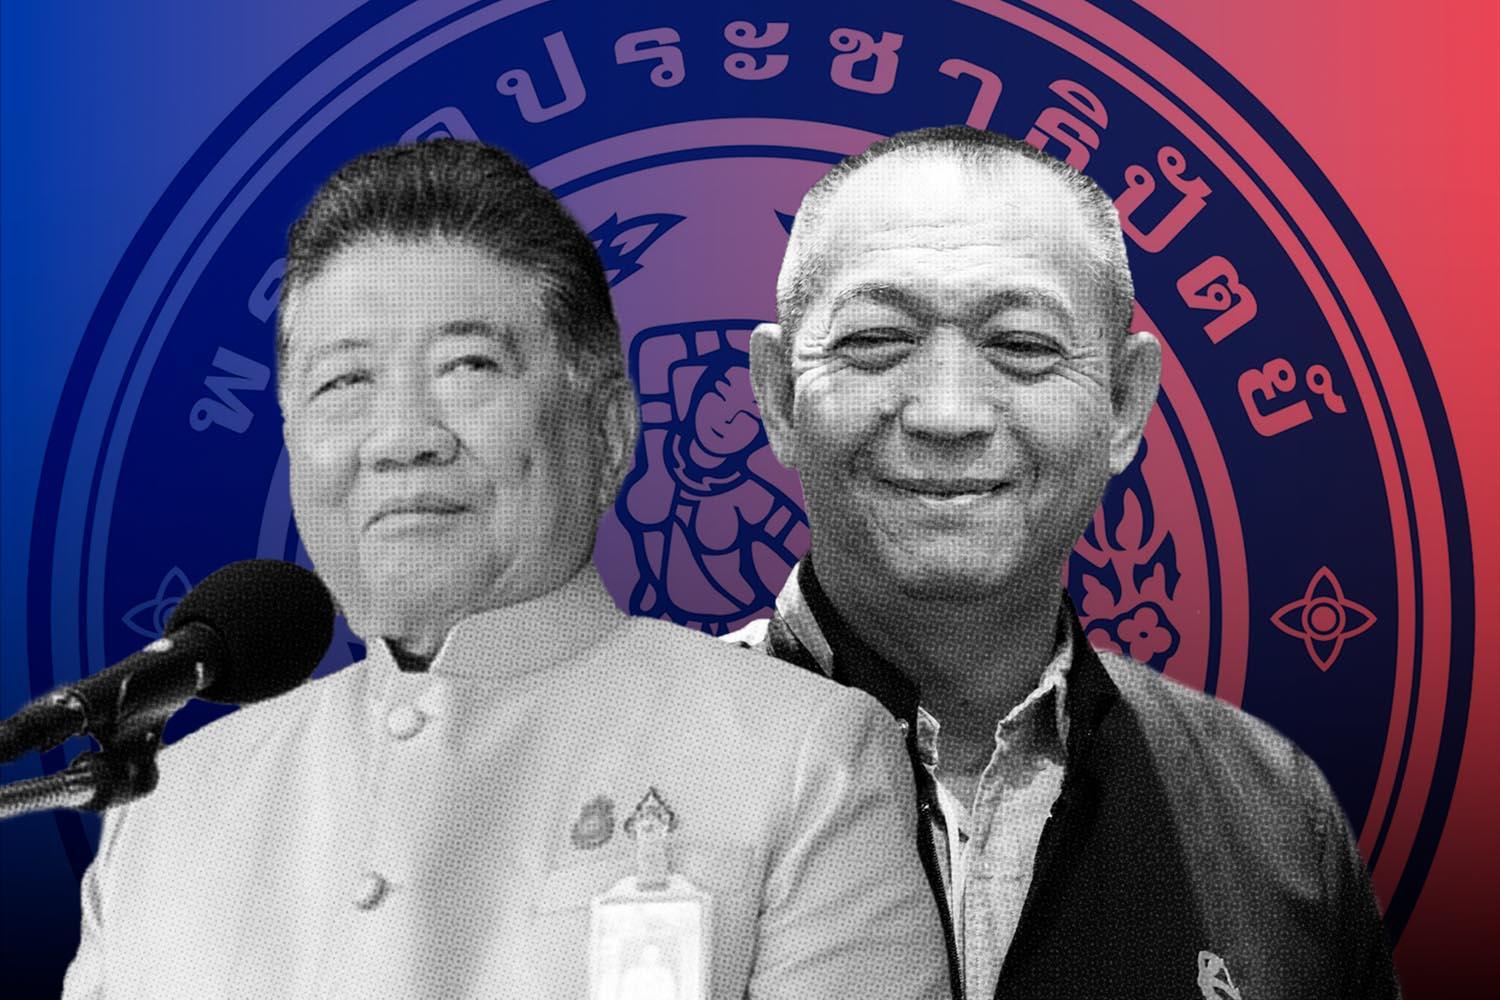 Phumtham-said-about-bringing-Democrat-Party-into-government-is-unreliable-news-SPACEBAR-Hero.jpg